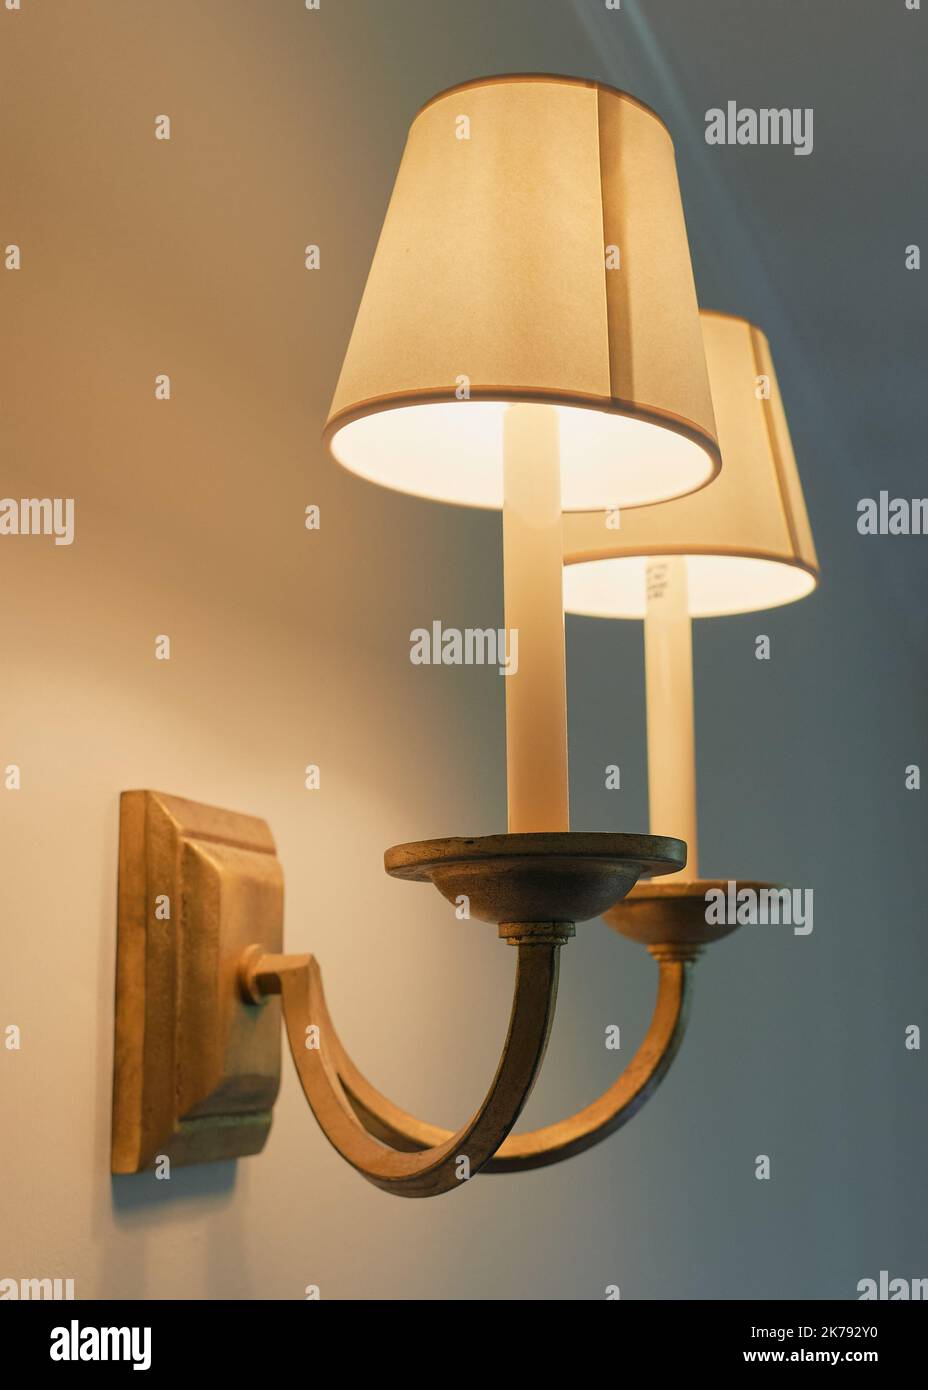 A classic looking double lamp wall fixture with lamp shades photographed in orange and teal color accent Stock Photo